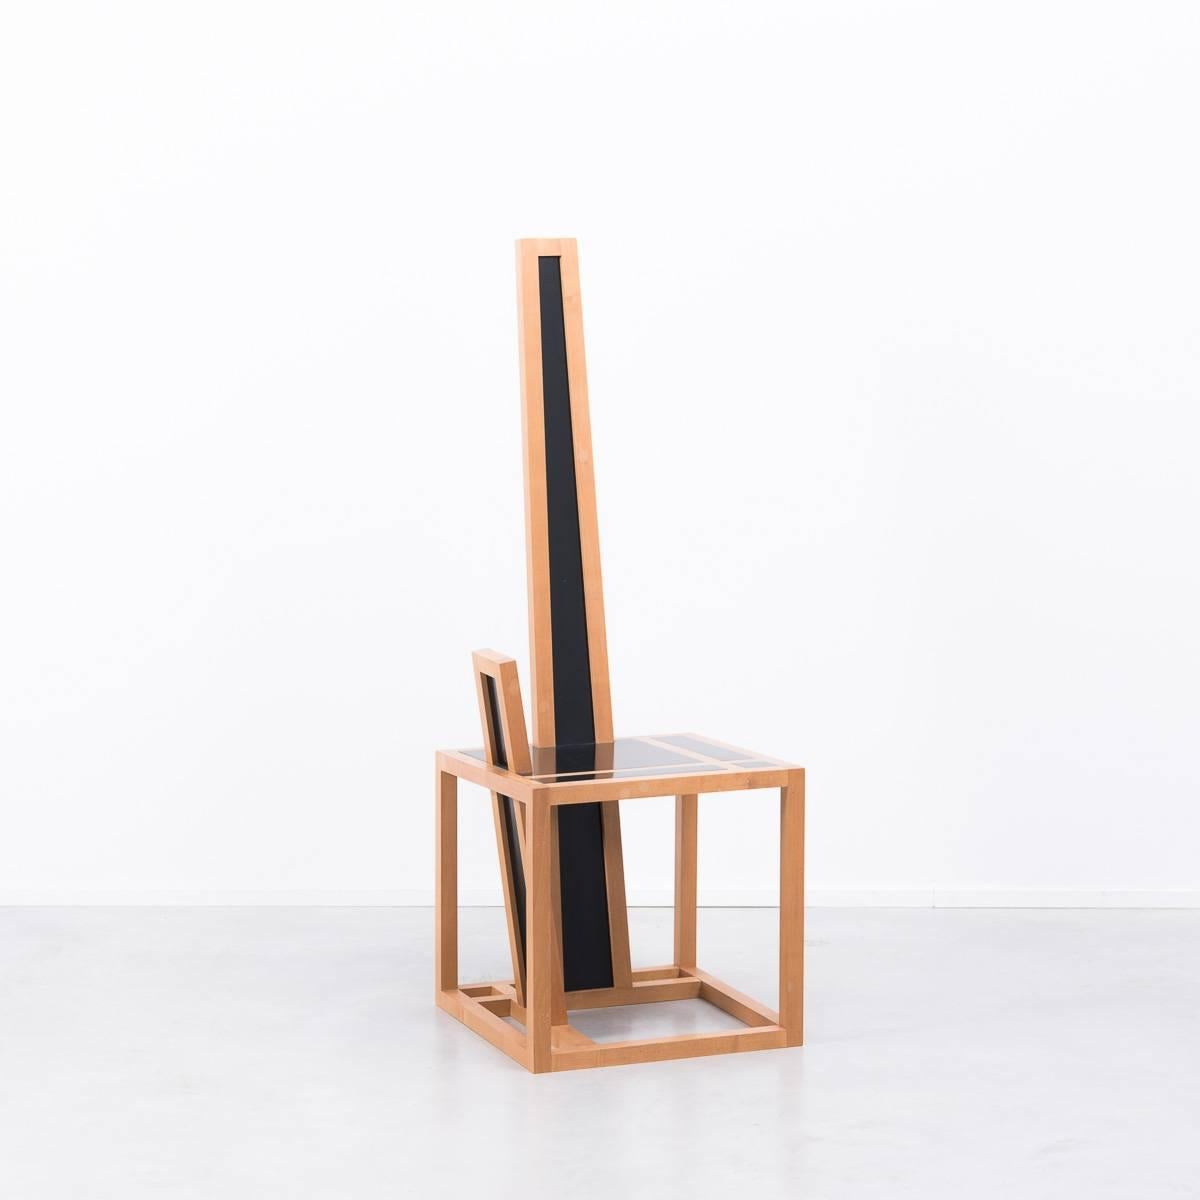 A stunning and sculptural chair handmade from solid maple with black lacquered seating. Little is known about the origins of this design other than it was made in England by an extremely skilled cabinet maker with absolute precision. The apparent